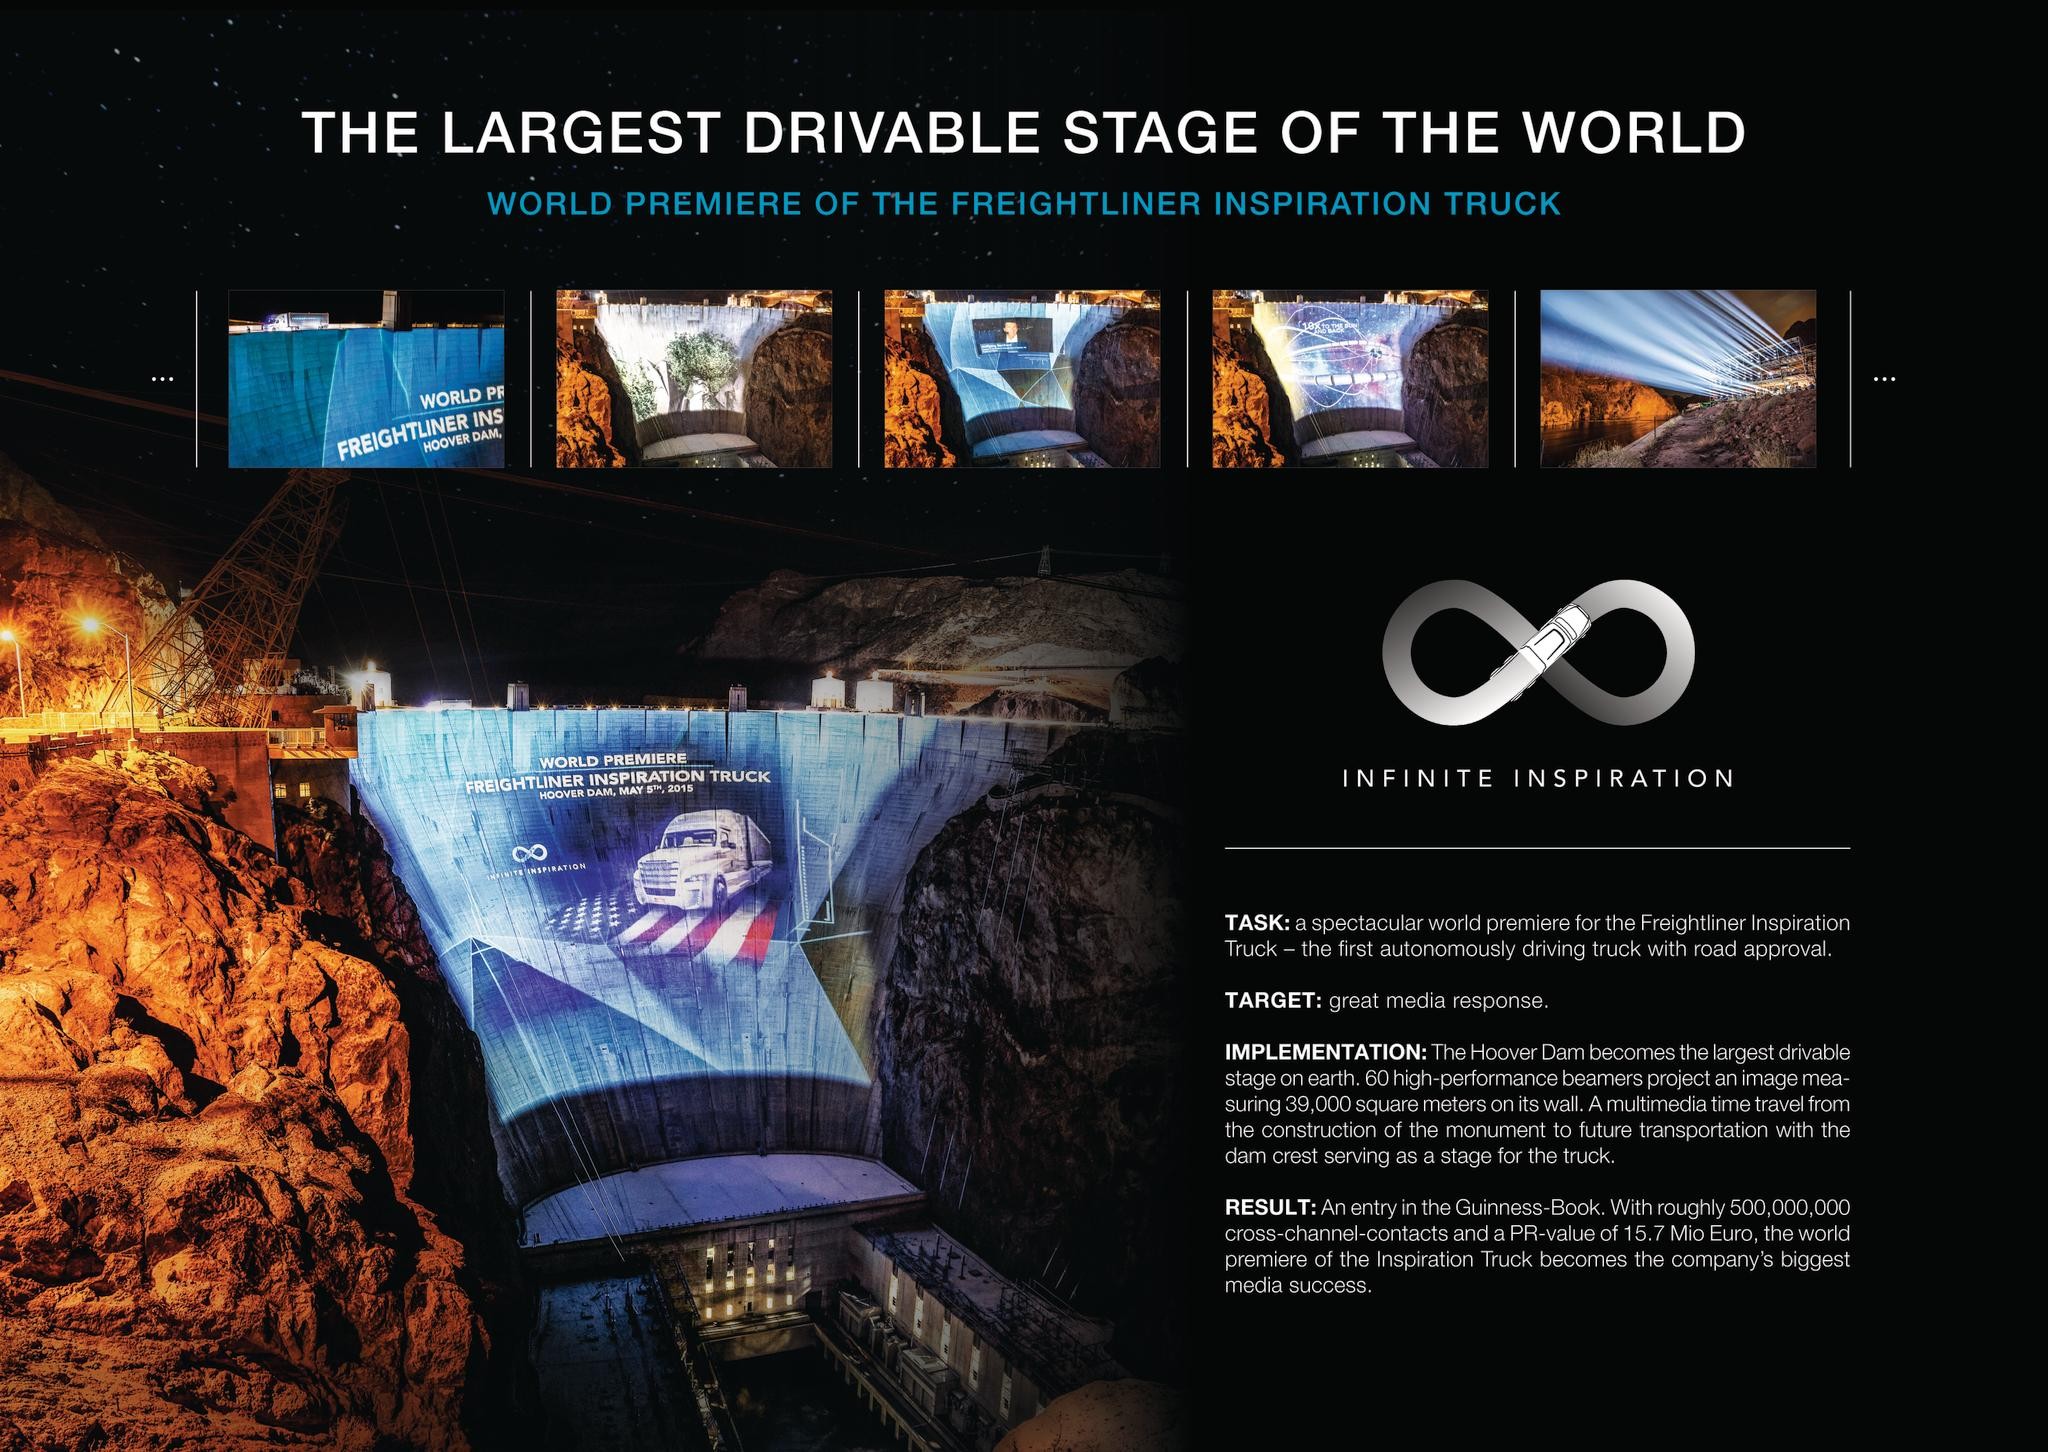 The Largest Drivable Stage of the World